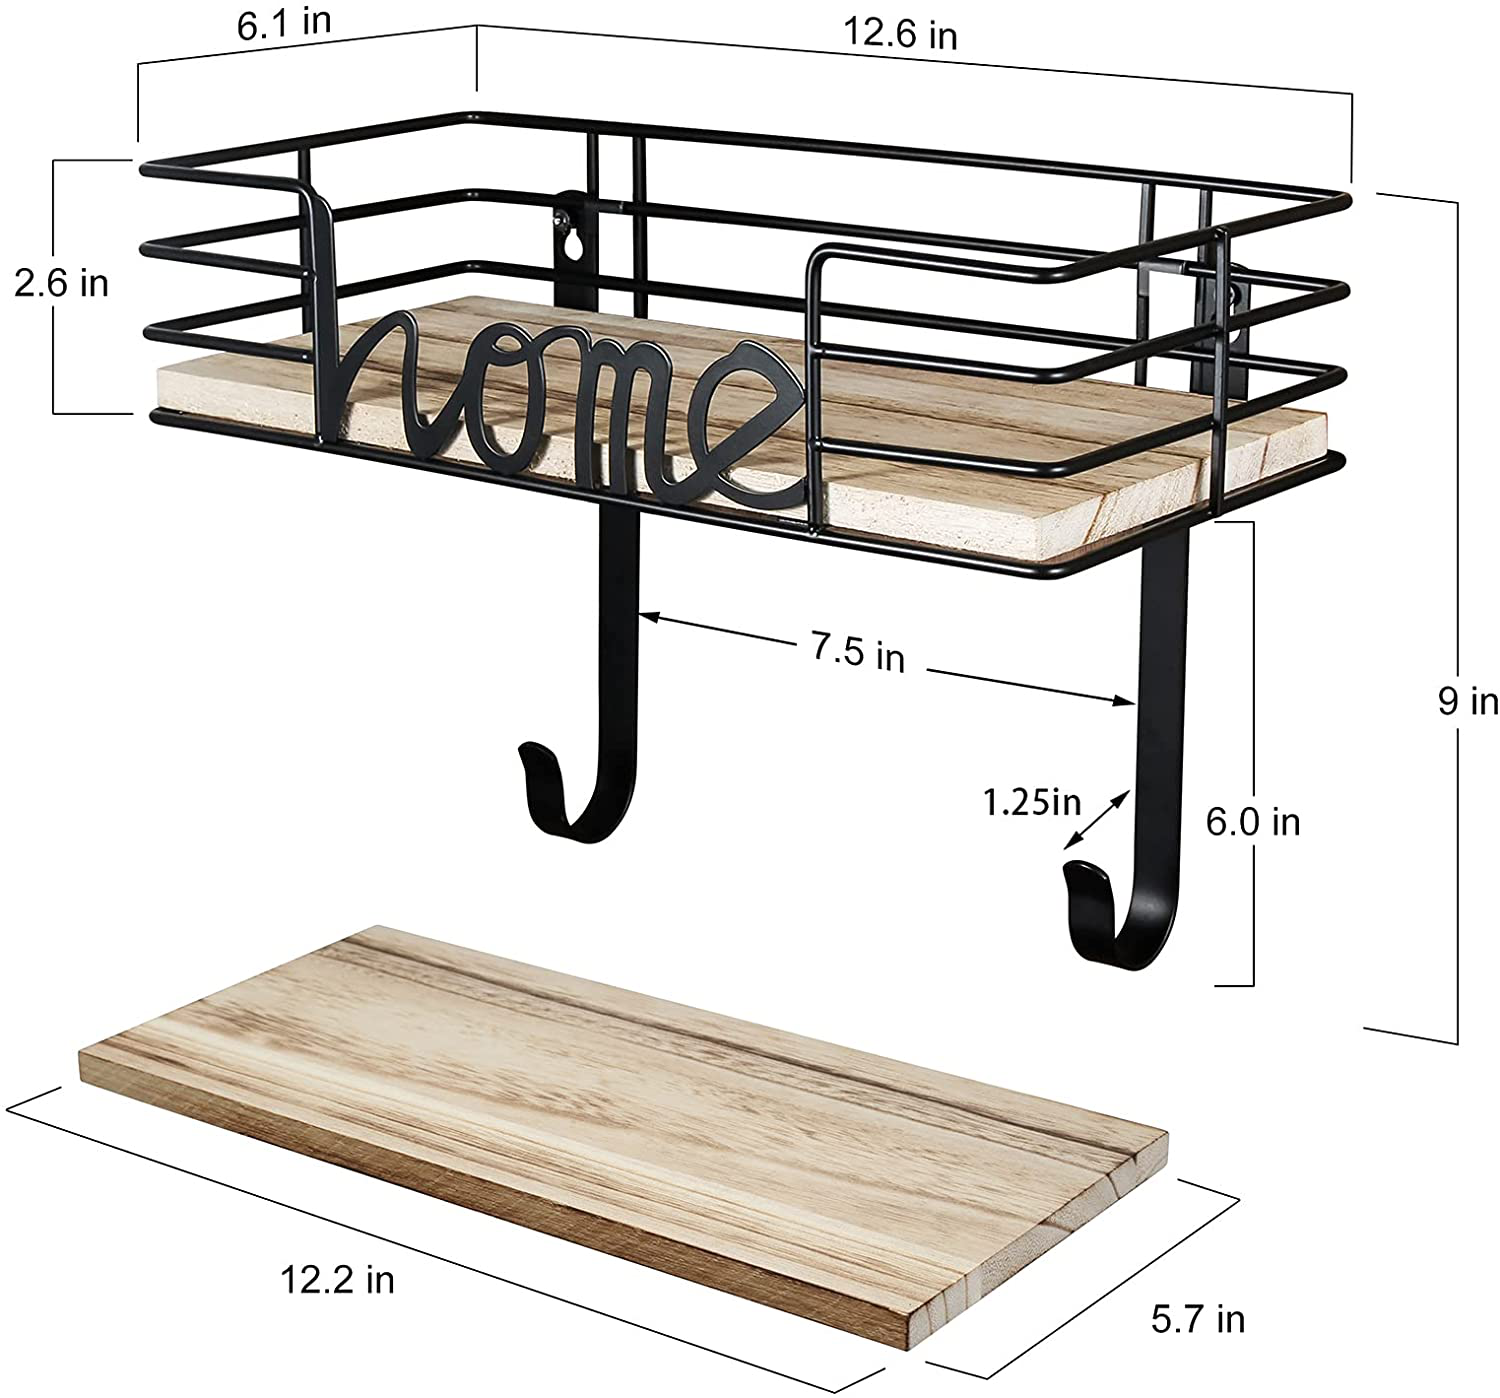 TJ.MOREE Laundry Room Decor-Ironing Board Hanger- Metal Wall Mount Iron and Ironing Board Holder, Laundry Room Organization and Storage with Large Storage Black Wooden Base Basket and Removable Hooks